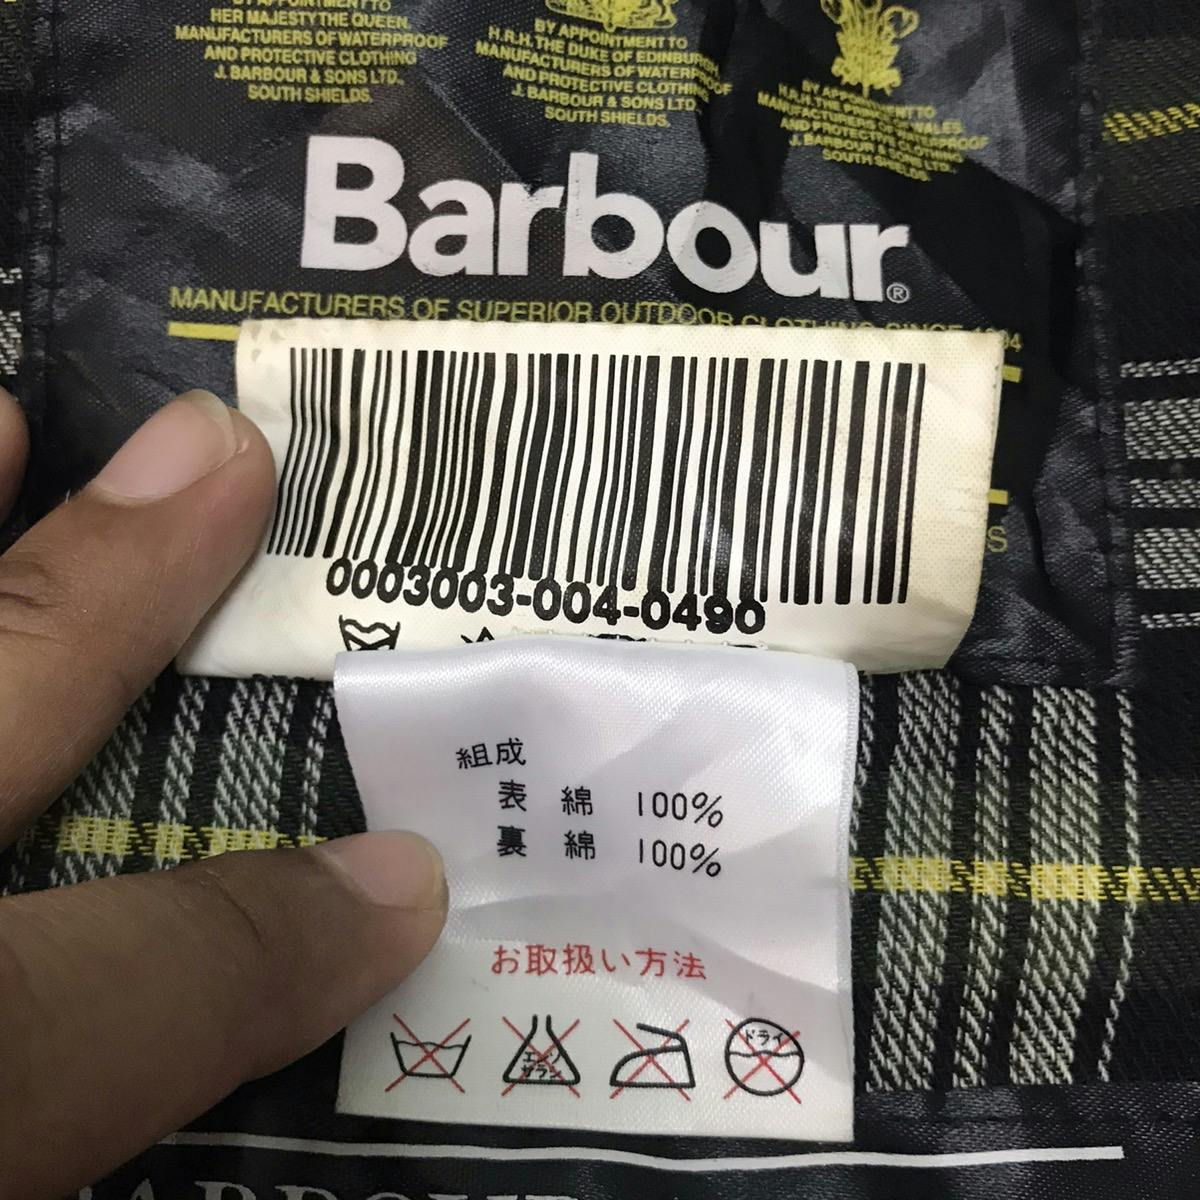 Barbour Wax A100 Bedale Jacket Made in England - 18